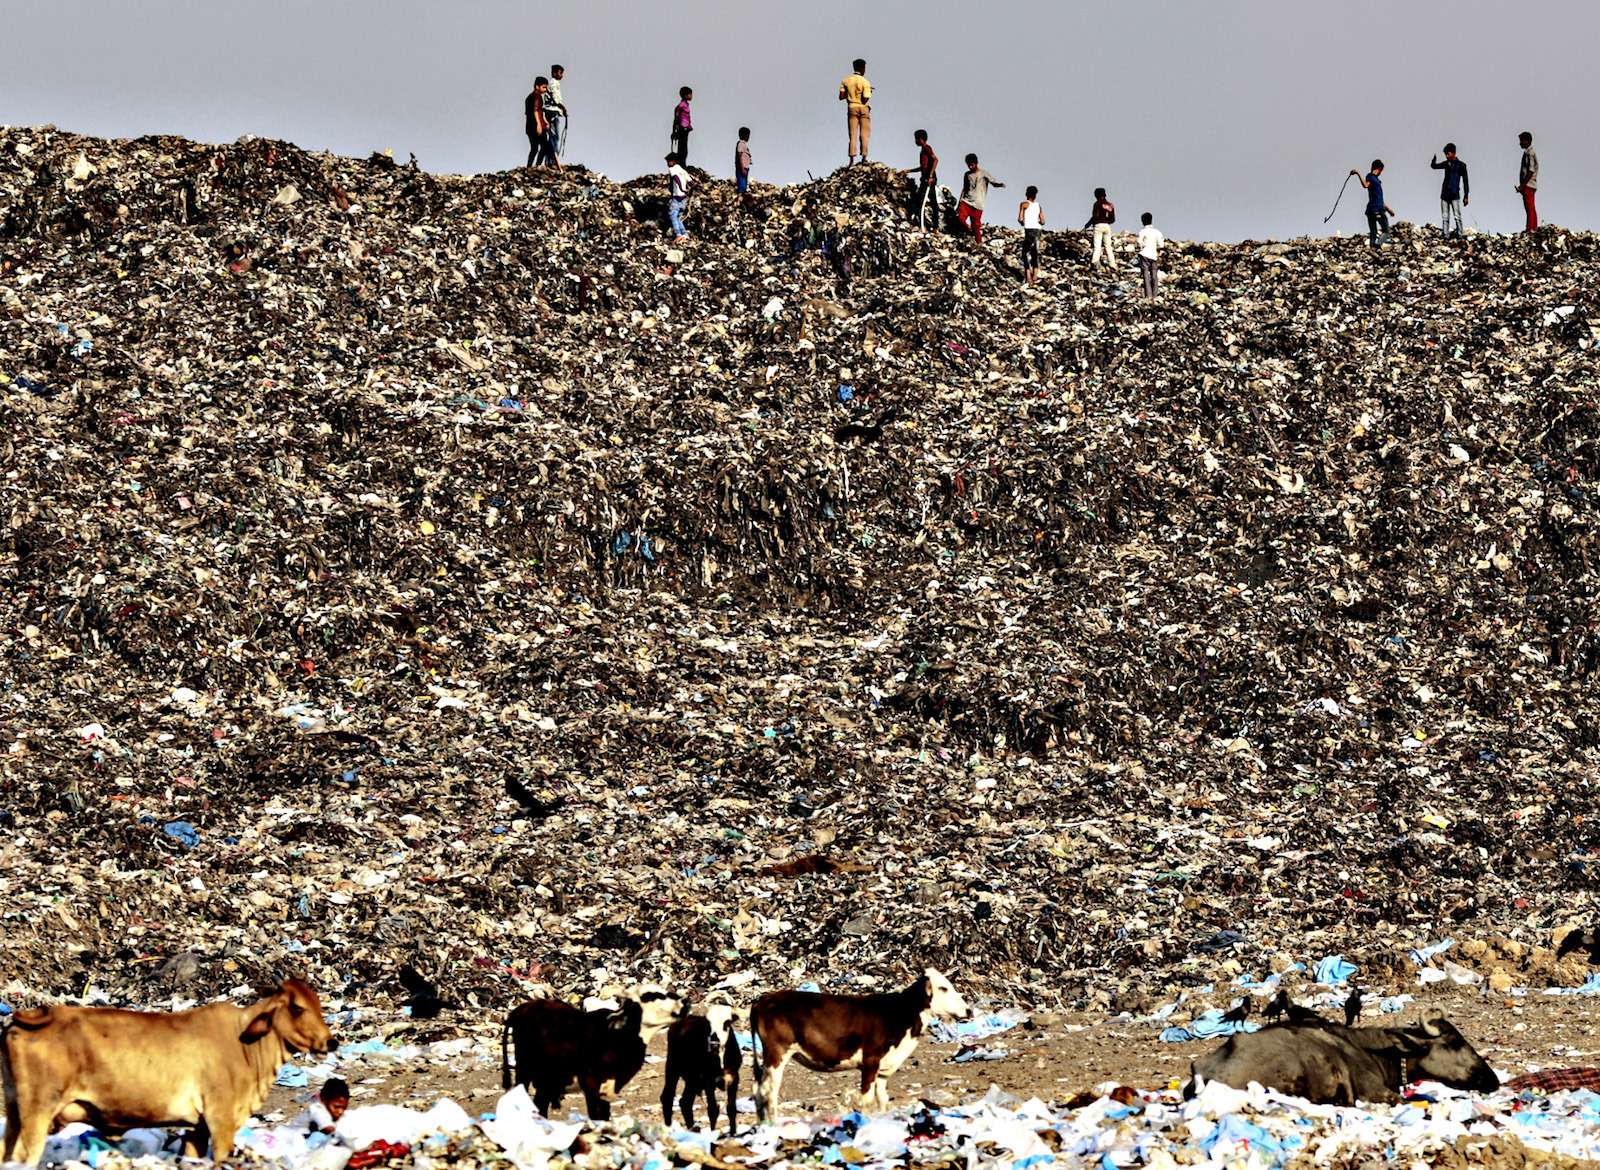 Garbage At The Deonar Landfill Site As Trash Mountain Rising in Mumbai Swamps Modi 21st Century Vision...Boys play as cows graze through garbage at the Deonar landfill site in Mumbai, India, on Wednesday, March 11, 2015. Mumbai is running out of space for its waste, and Deonar, Asia's oldest and largest dumpsite, is bursting. Each day, more than 500 trucks line up along a two-lane dirt road in an eastern suburb, waiting to add to a mountain of refuse tall enough to submerge the White House twice over